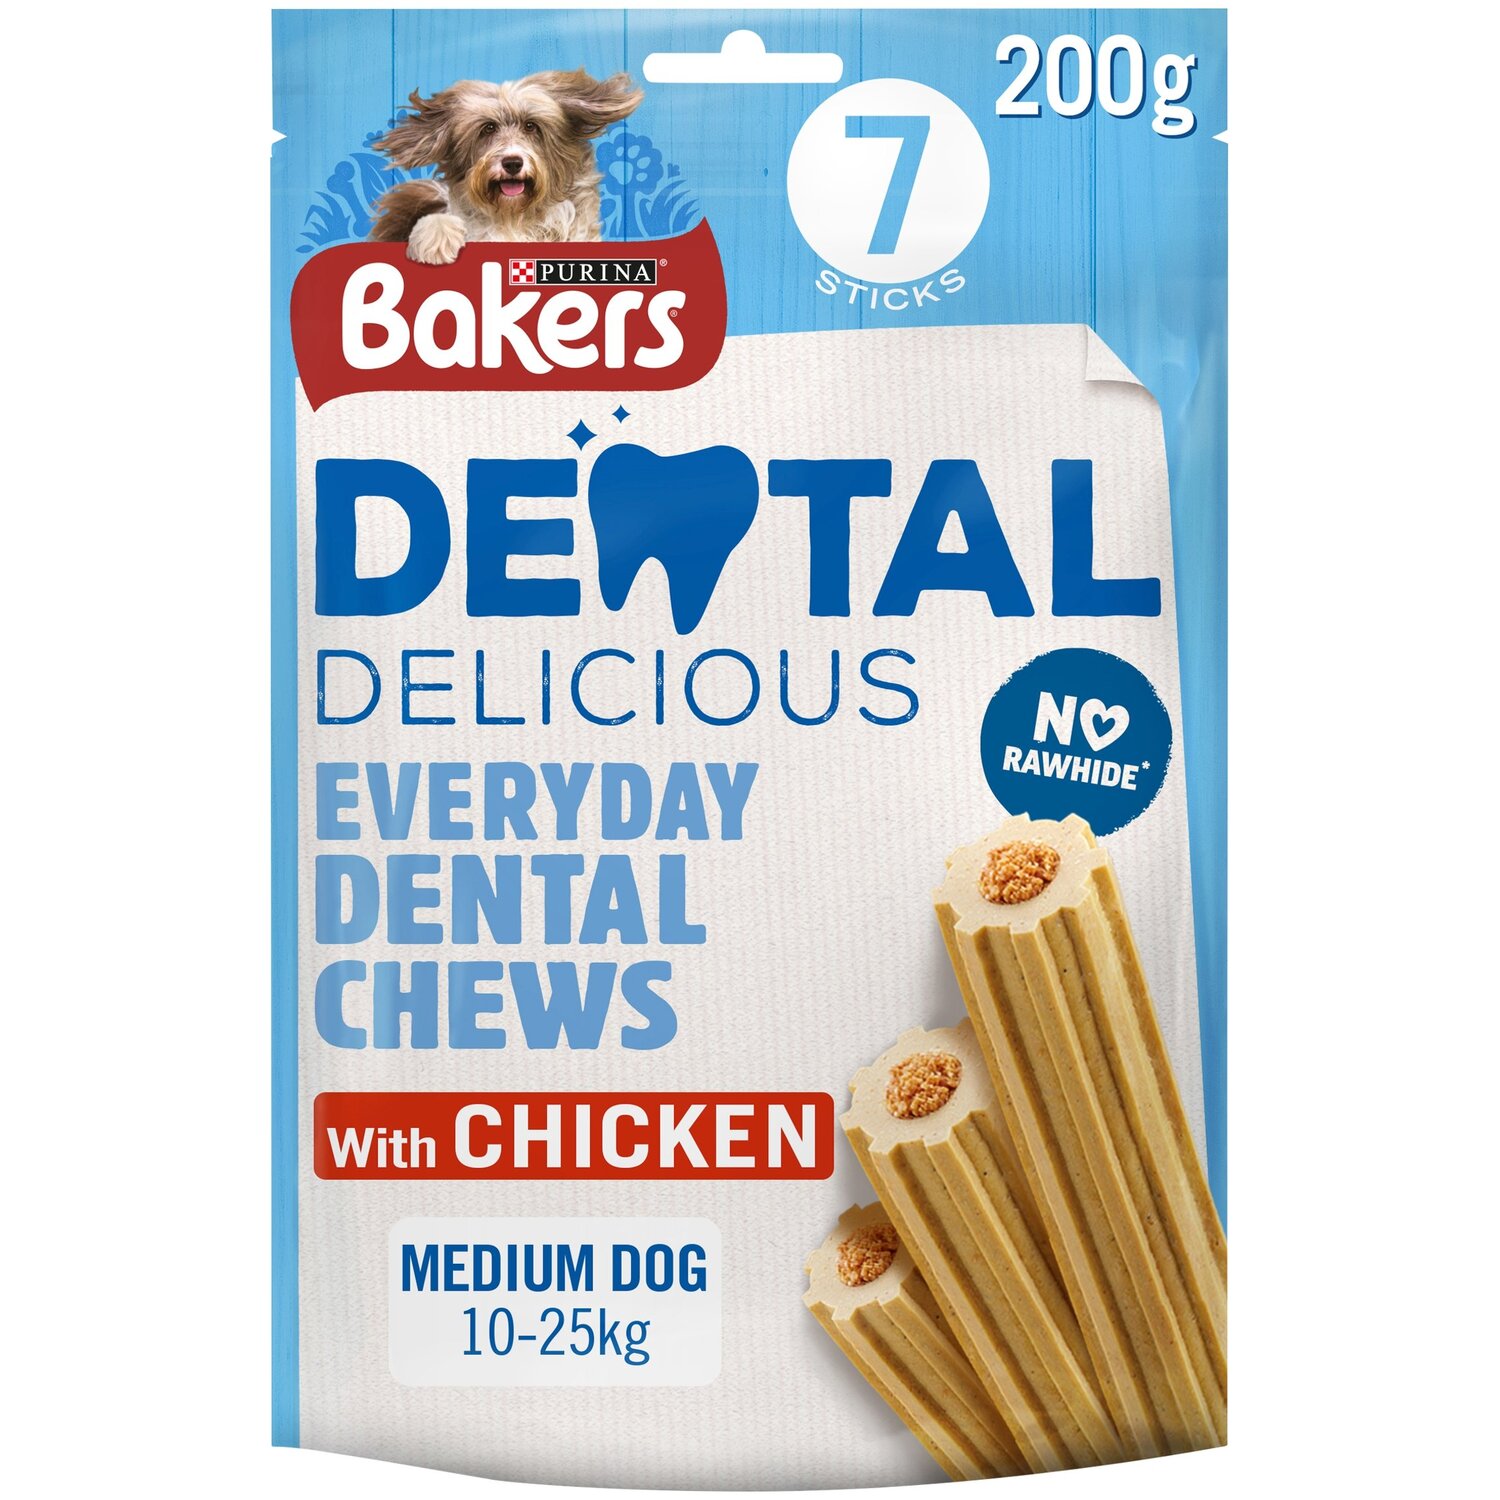 Purina Bakers Dental Delicious Chicken Chews Dog Treats 200g Image 1